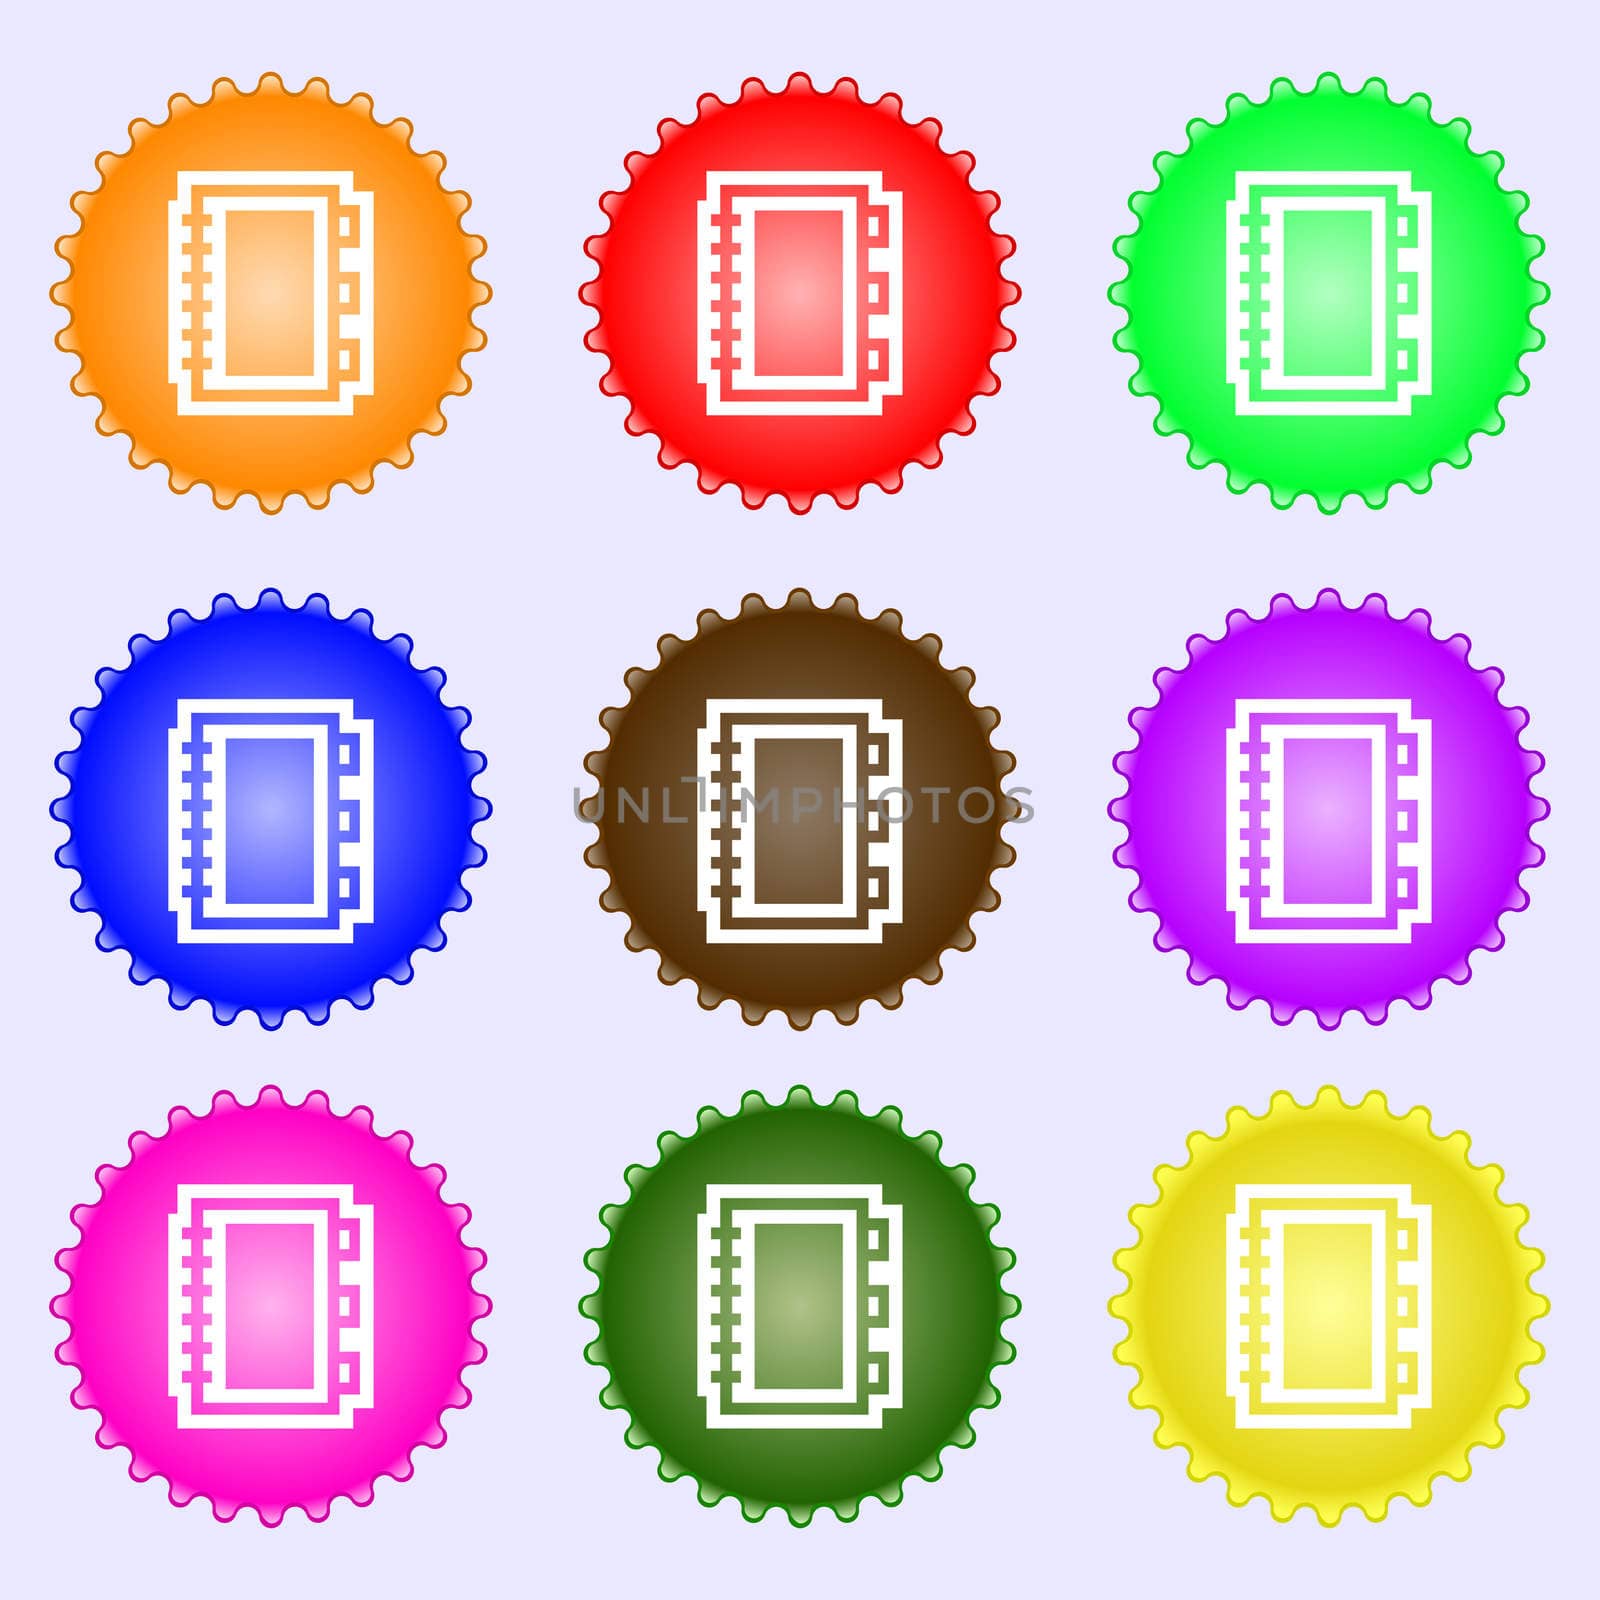 Book icon sign. A set of nine different colored labels. illustration